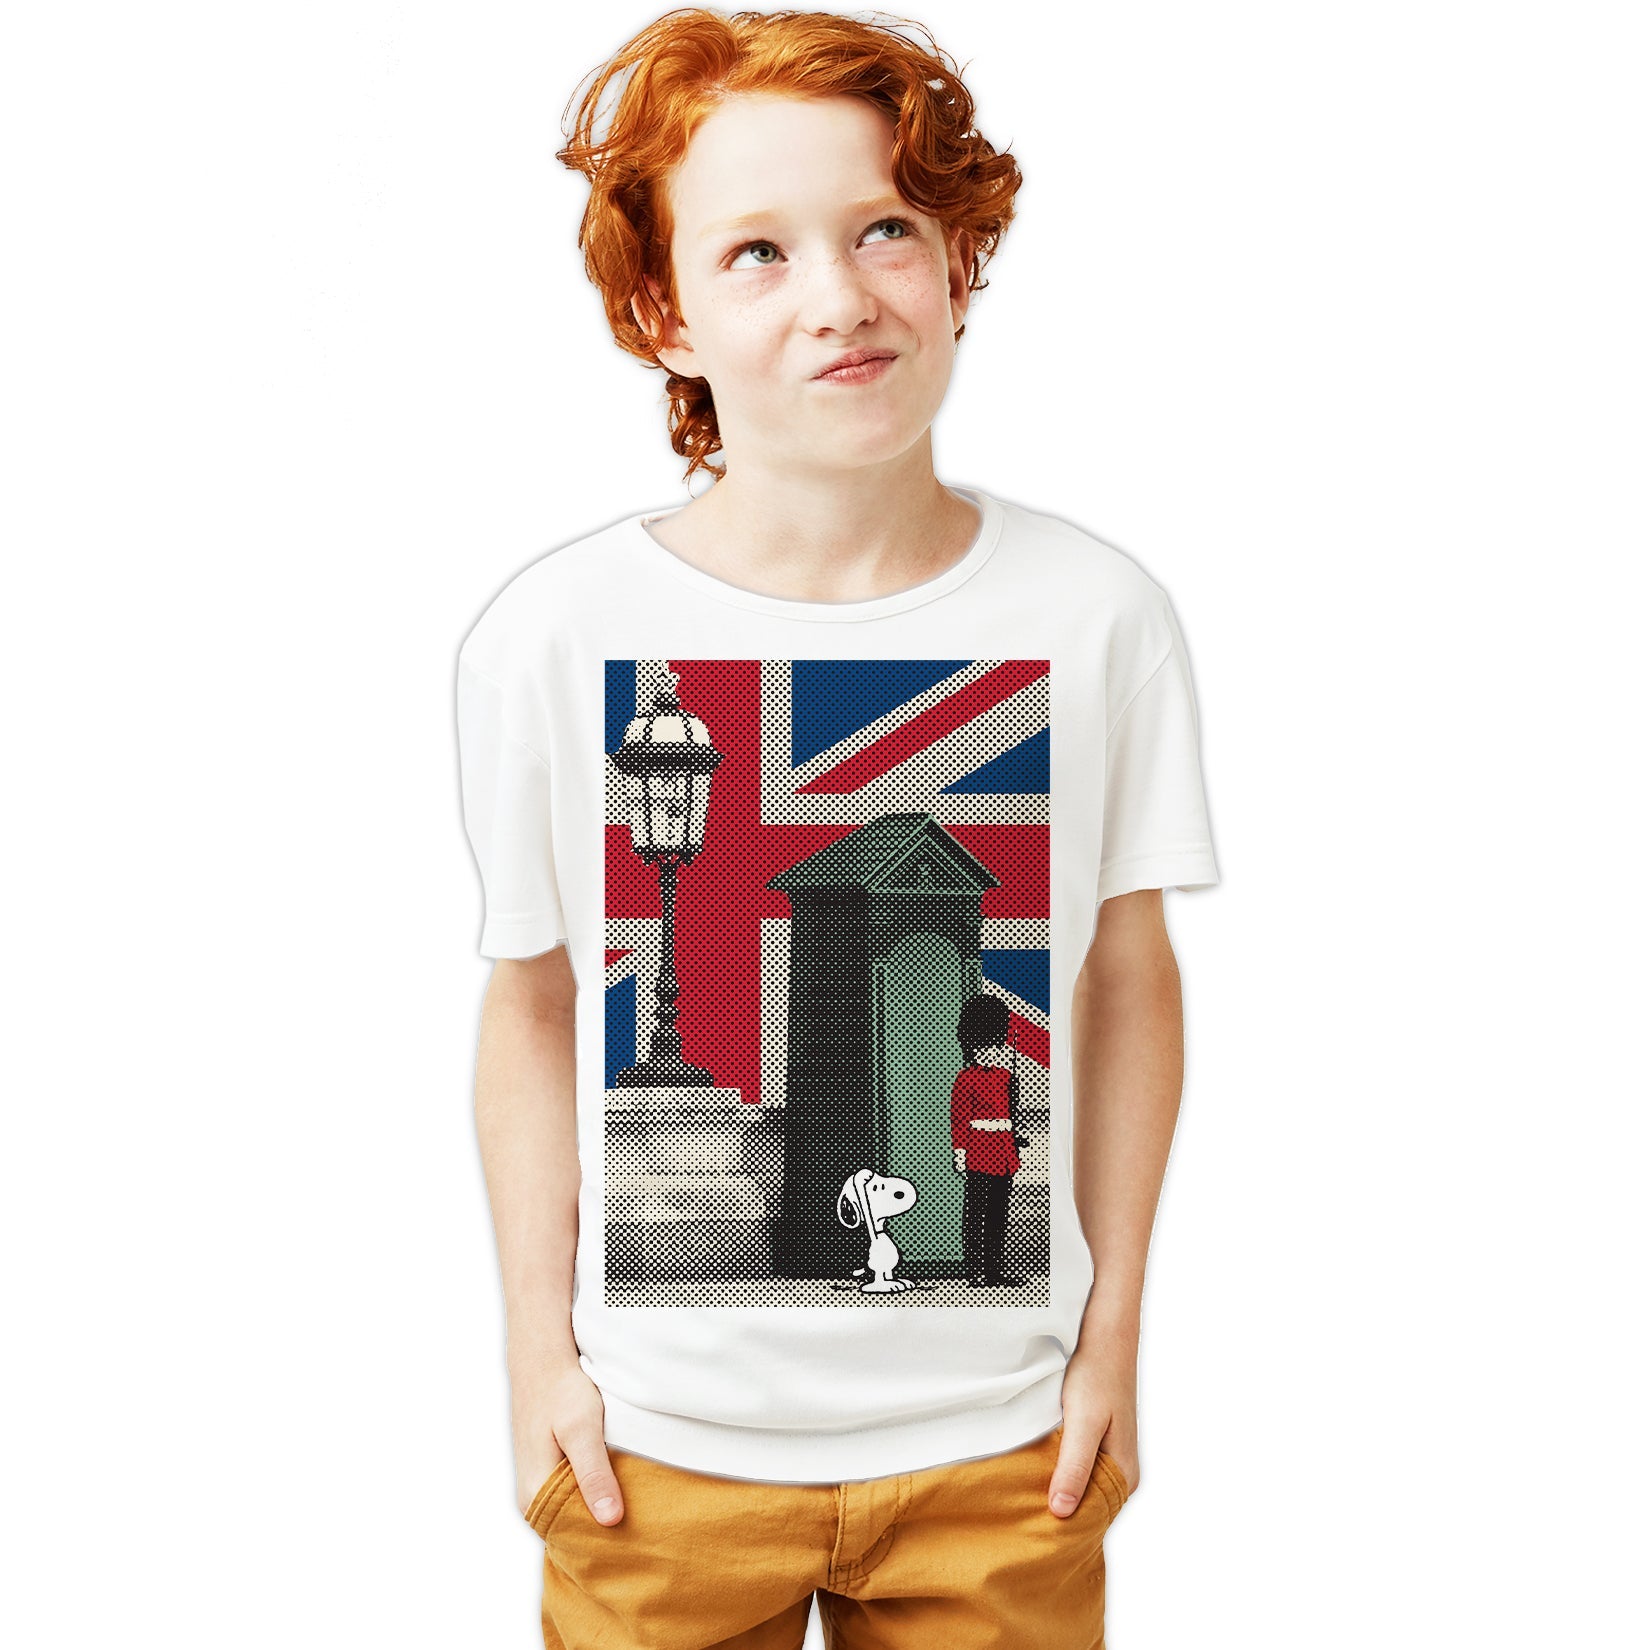 Peanuts Snoopy Remix UK Beefeater Official Youth T-Shirt